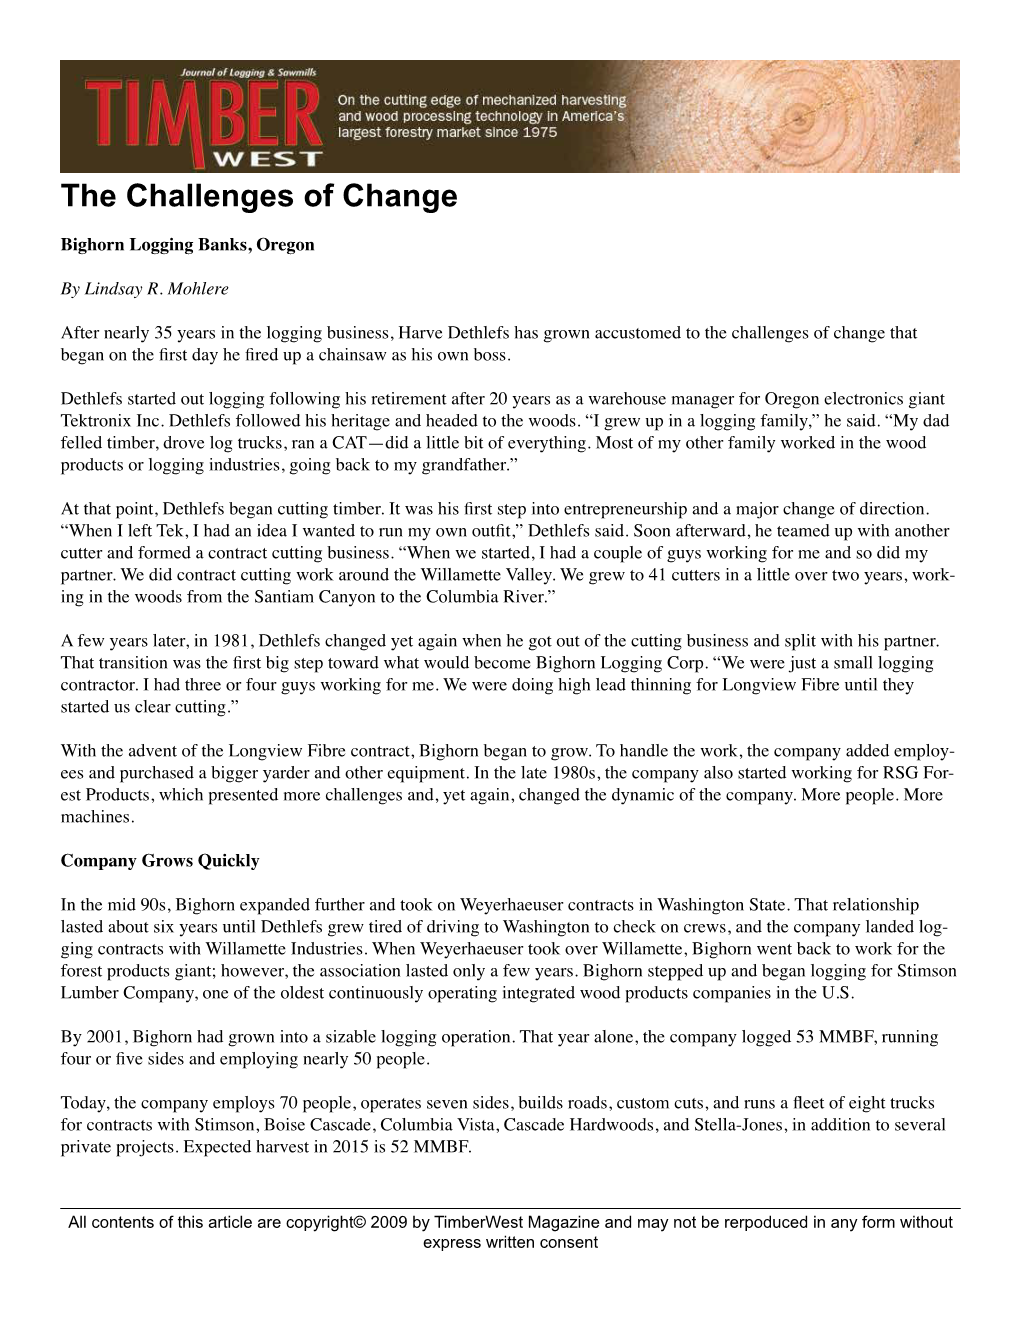 The Challenges of Change